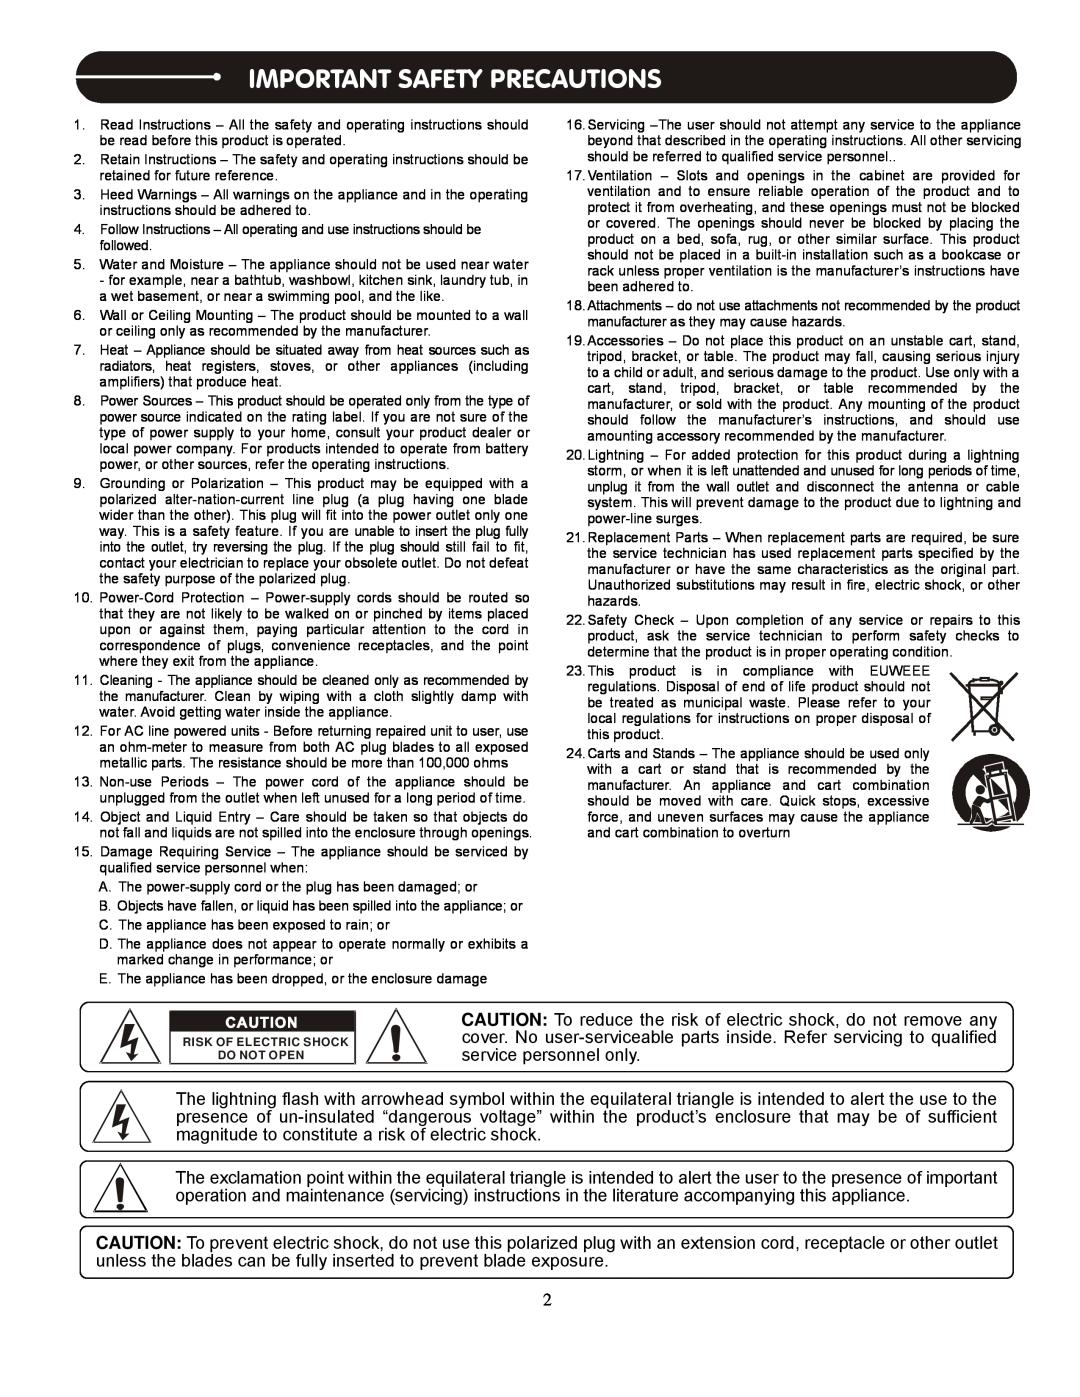 Stanton S.300 user manual Important Safety Precautions 